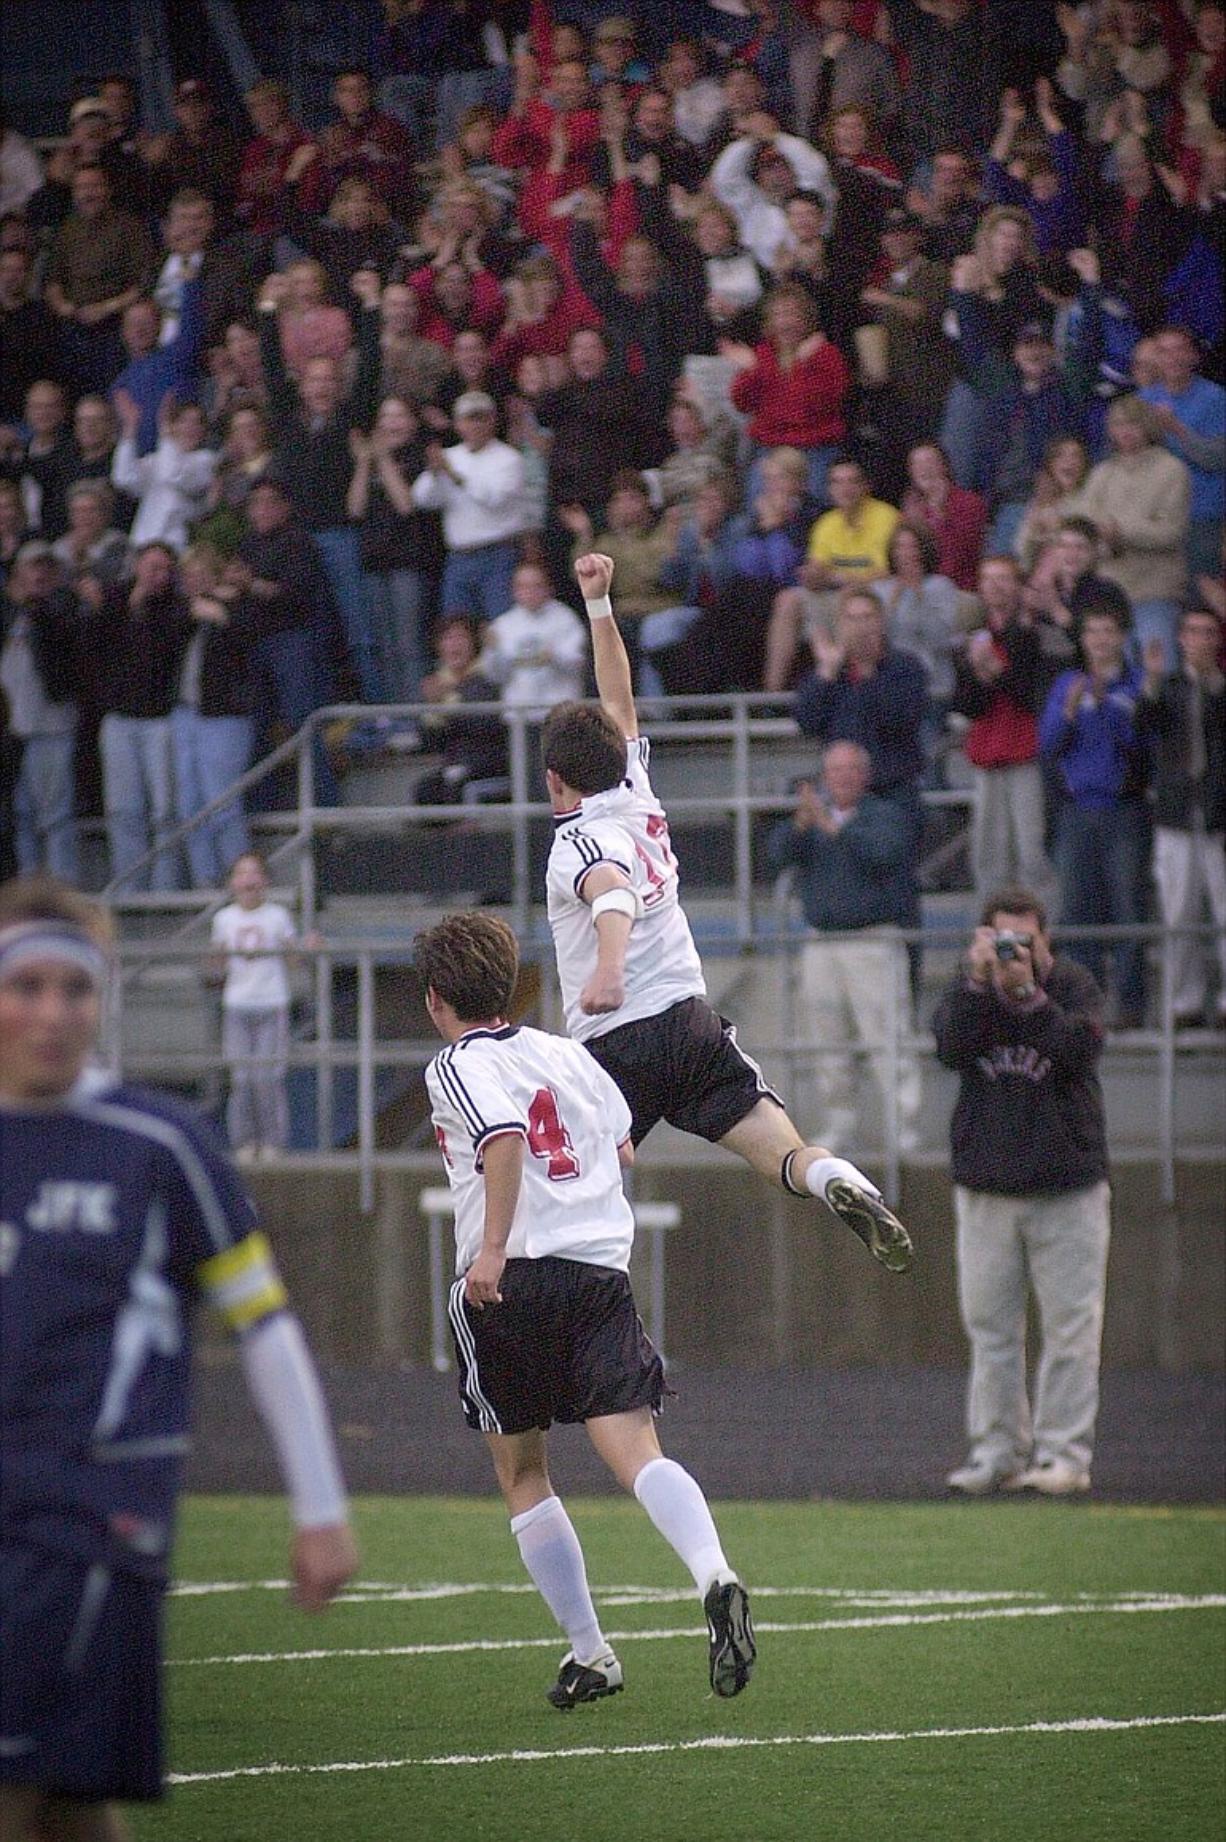 Steven Lane/The Columbian
The 2003 state semifinal match between Camas and Kennedy in front of a packed house is one of coach Roland Minder's fondest memories of Doc Harris Stadium.